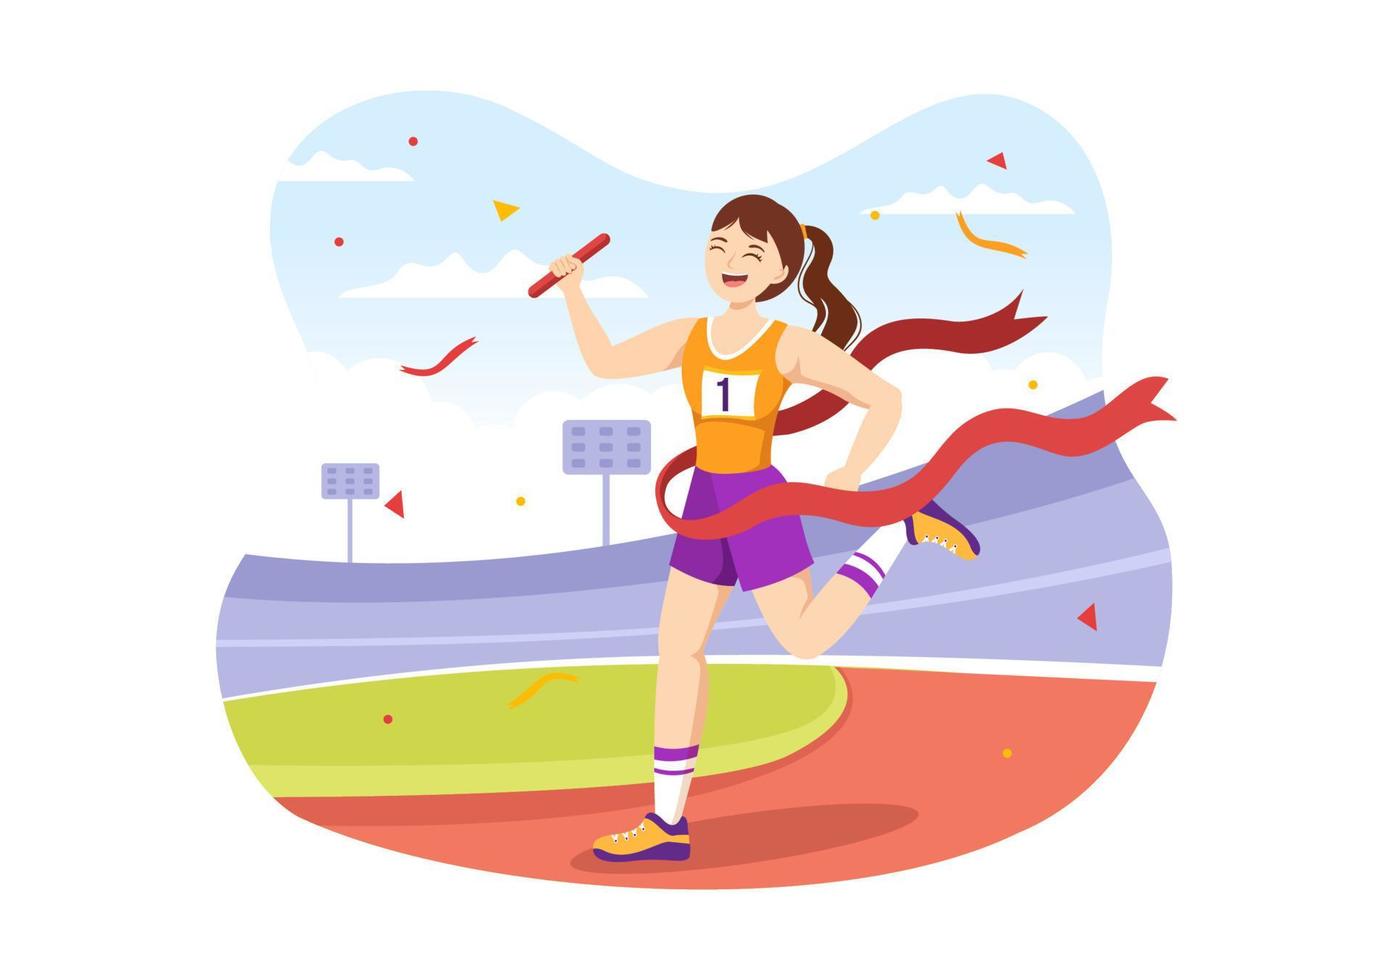 Relay Race Illustration by Passing the Baton to Teammates Until Reaching the Finish Line in a Sports Championship Flat Cartoon Hand Drawing Template vector